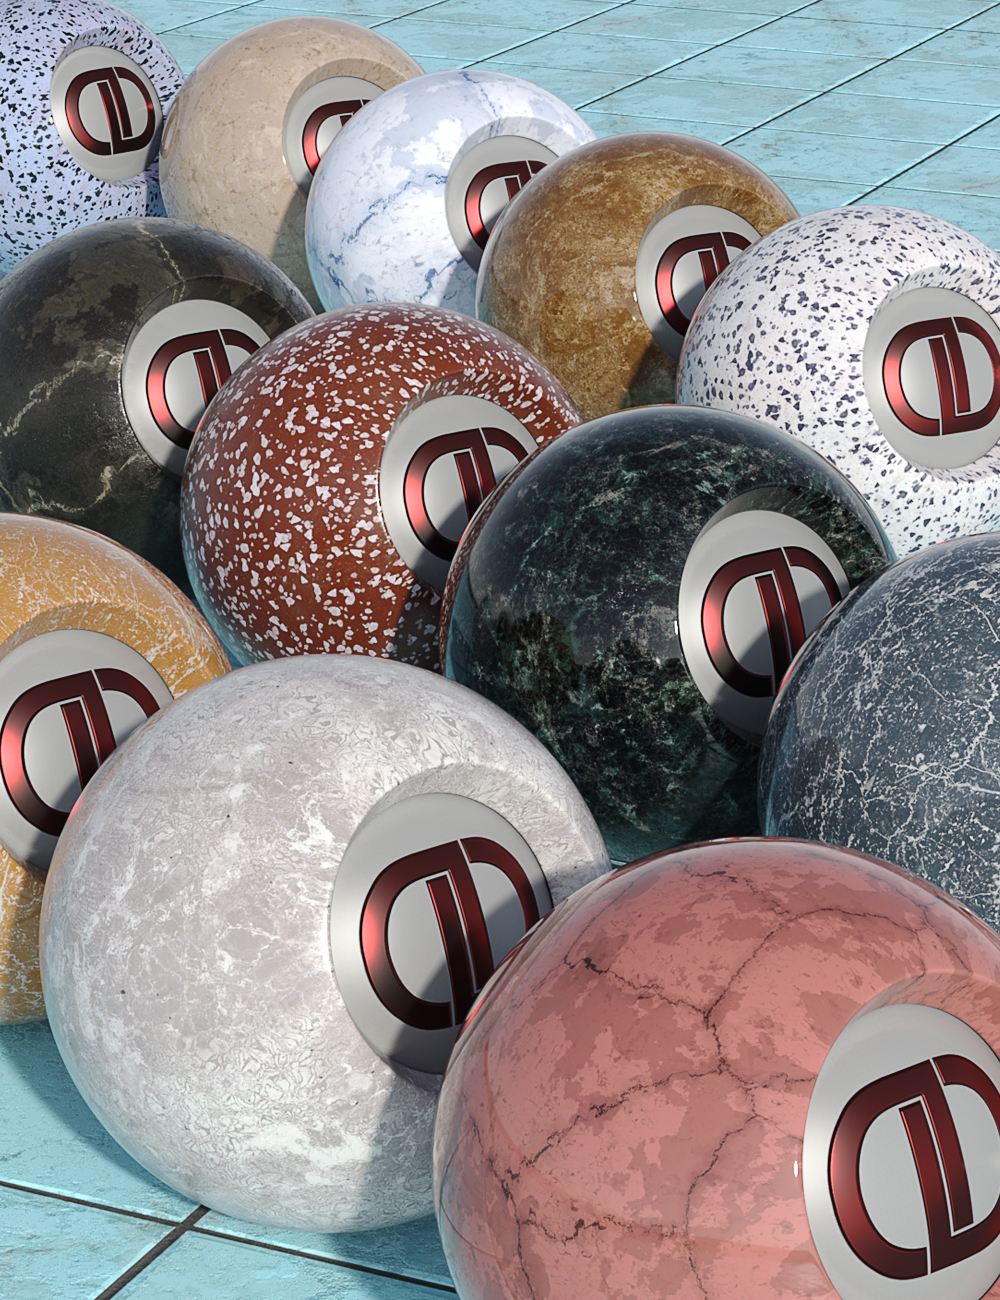 DD PBR Marble Shaders for Iray by: Digital Delirium, 3D Models by Daz 3D